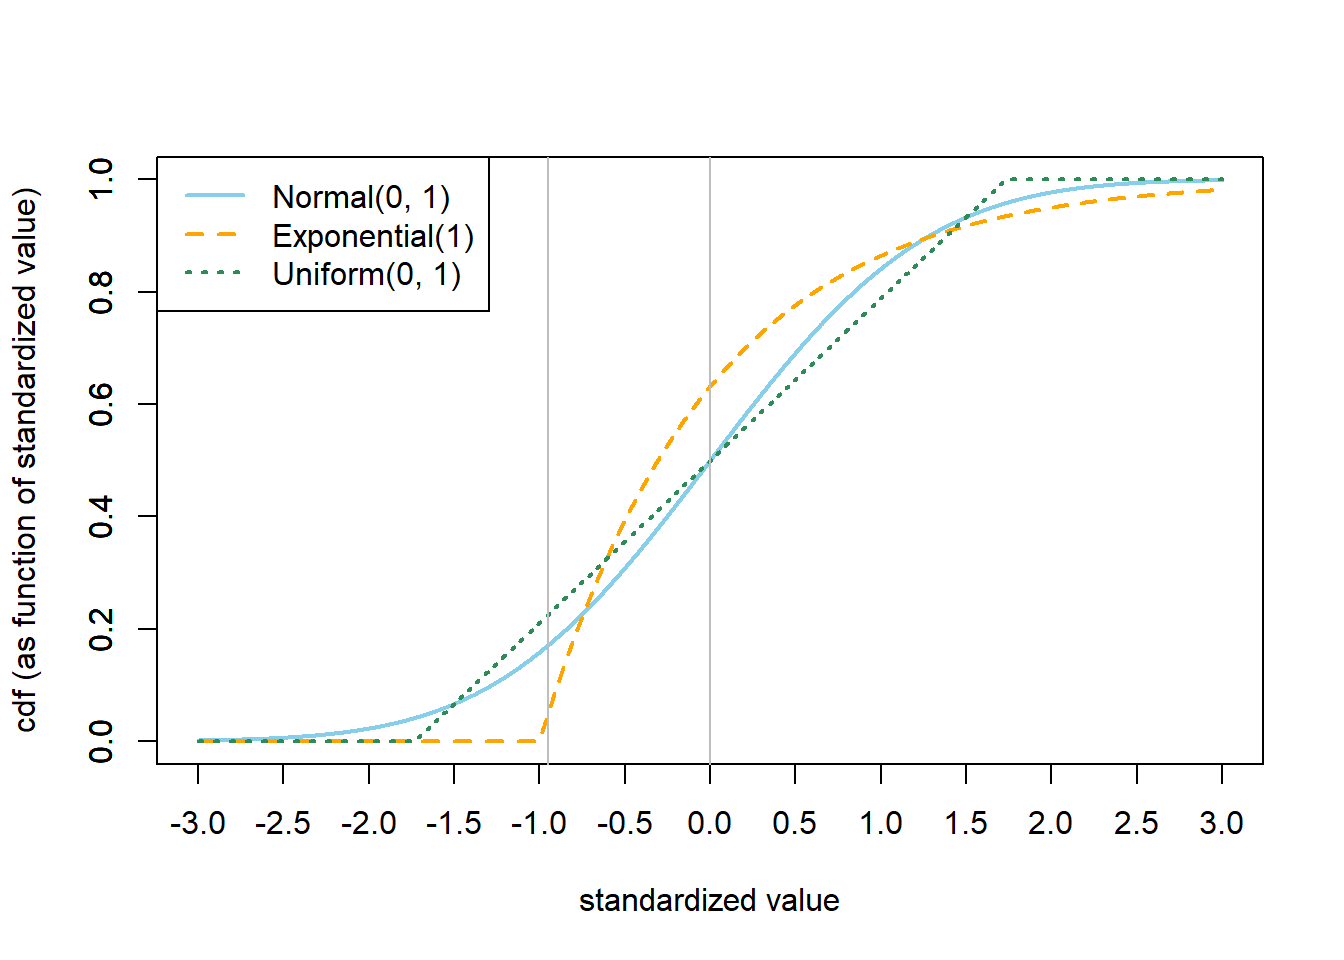 Comparison of cdf, as a function of standardized value, for the Normal(0, 1), Exponential(1), and Uniform(0, 1) distributions.